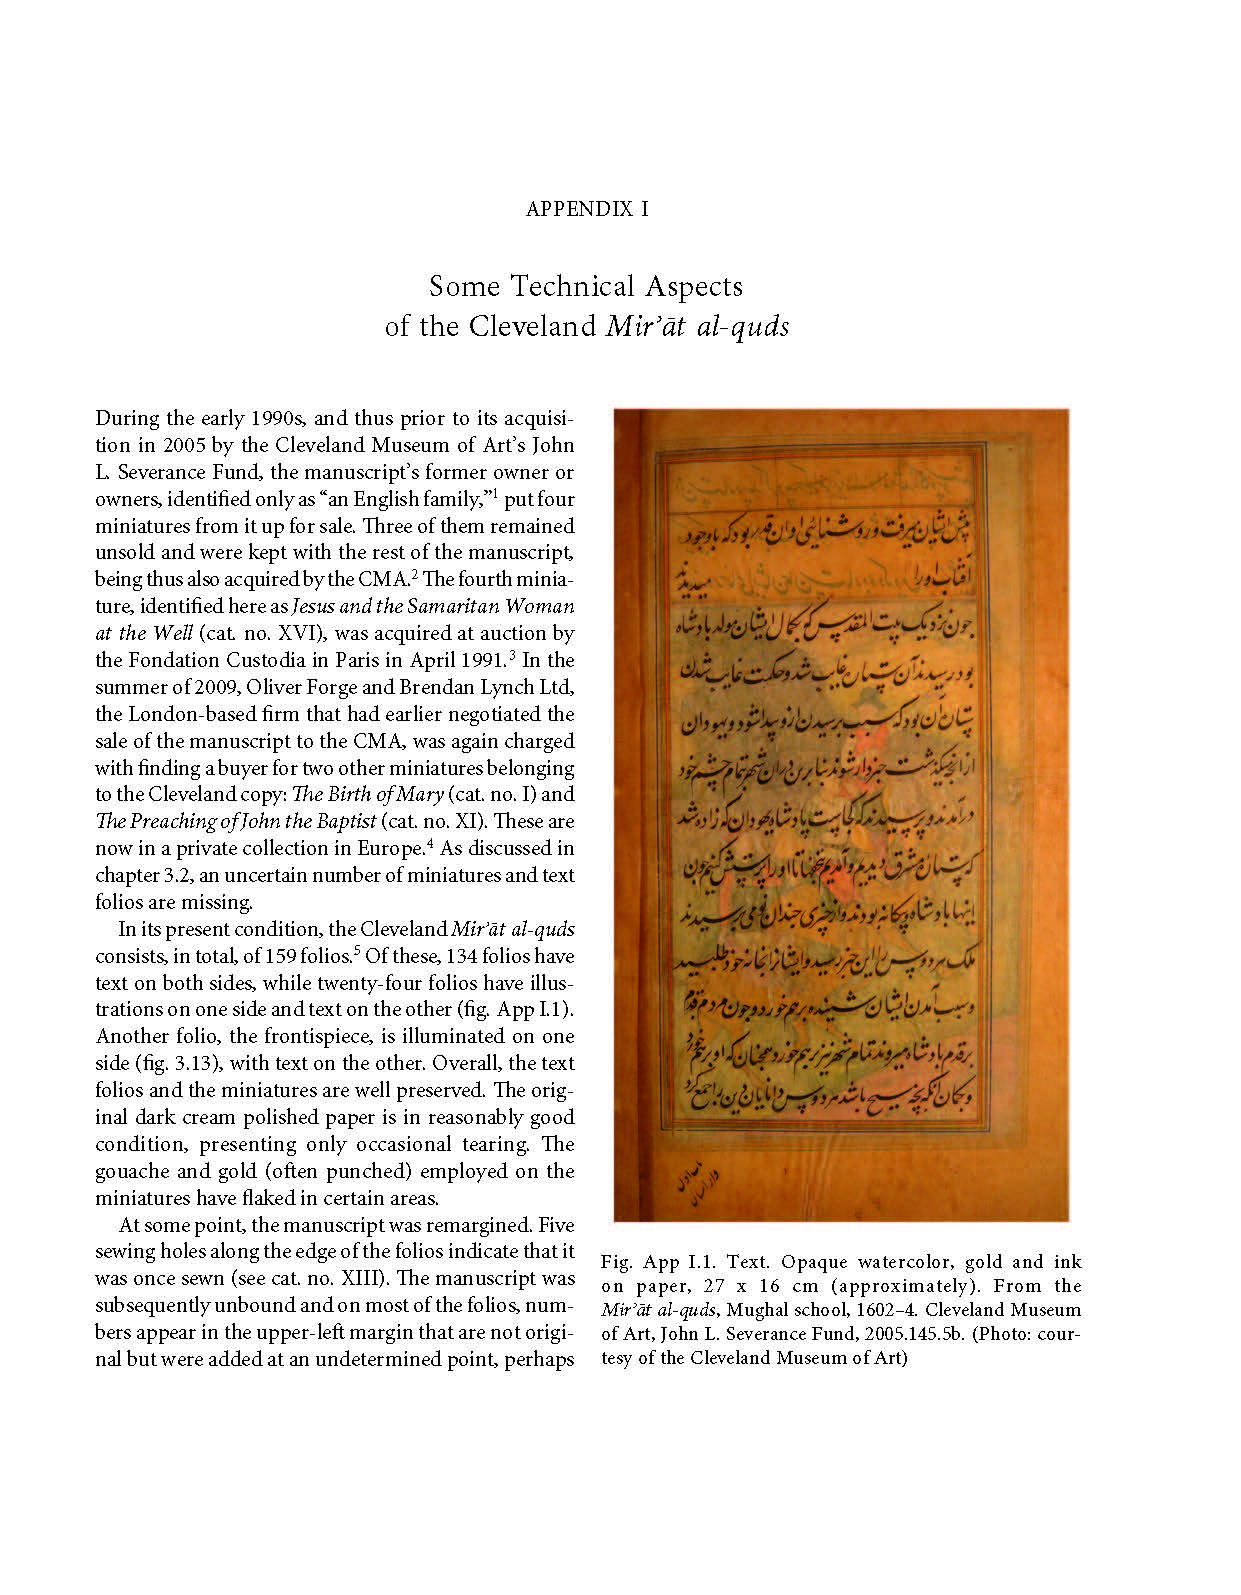 Pedro Moura Carvalho - Appendix I of&nbsp;<span style="font-style: italic;">Mir’āt al-quds (Mirror of Holiness): A Life of Christ for Emperor Akbar.&nbsp;</span>This study examines the&nbsp;<span style="font-style: italic;">Mir'at al-Quds (Mirror of Holiness)</span>, an account of the life of Christ written by a Jesuit missionary to the court of Mughal Emperor Akbar, who took an interest in Christianity. Three illustrated copies exist, the most important of which is in the Cleveland Museum of Art and forms the basis of this study. The text, originally in Persian, is translated to English for the first time by Wheeler M. Thackston. Appendix I contains codicological information on the Cleveland copy of <span style="font-style: italic;">Mir'at al-Quds</span>. This study is part of the series&nbsp;<span style="font-style: italic;">Studies and Sources on Islamic Art and Architecture: Supplements to Muqarnas</span>, Volume XII.